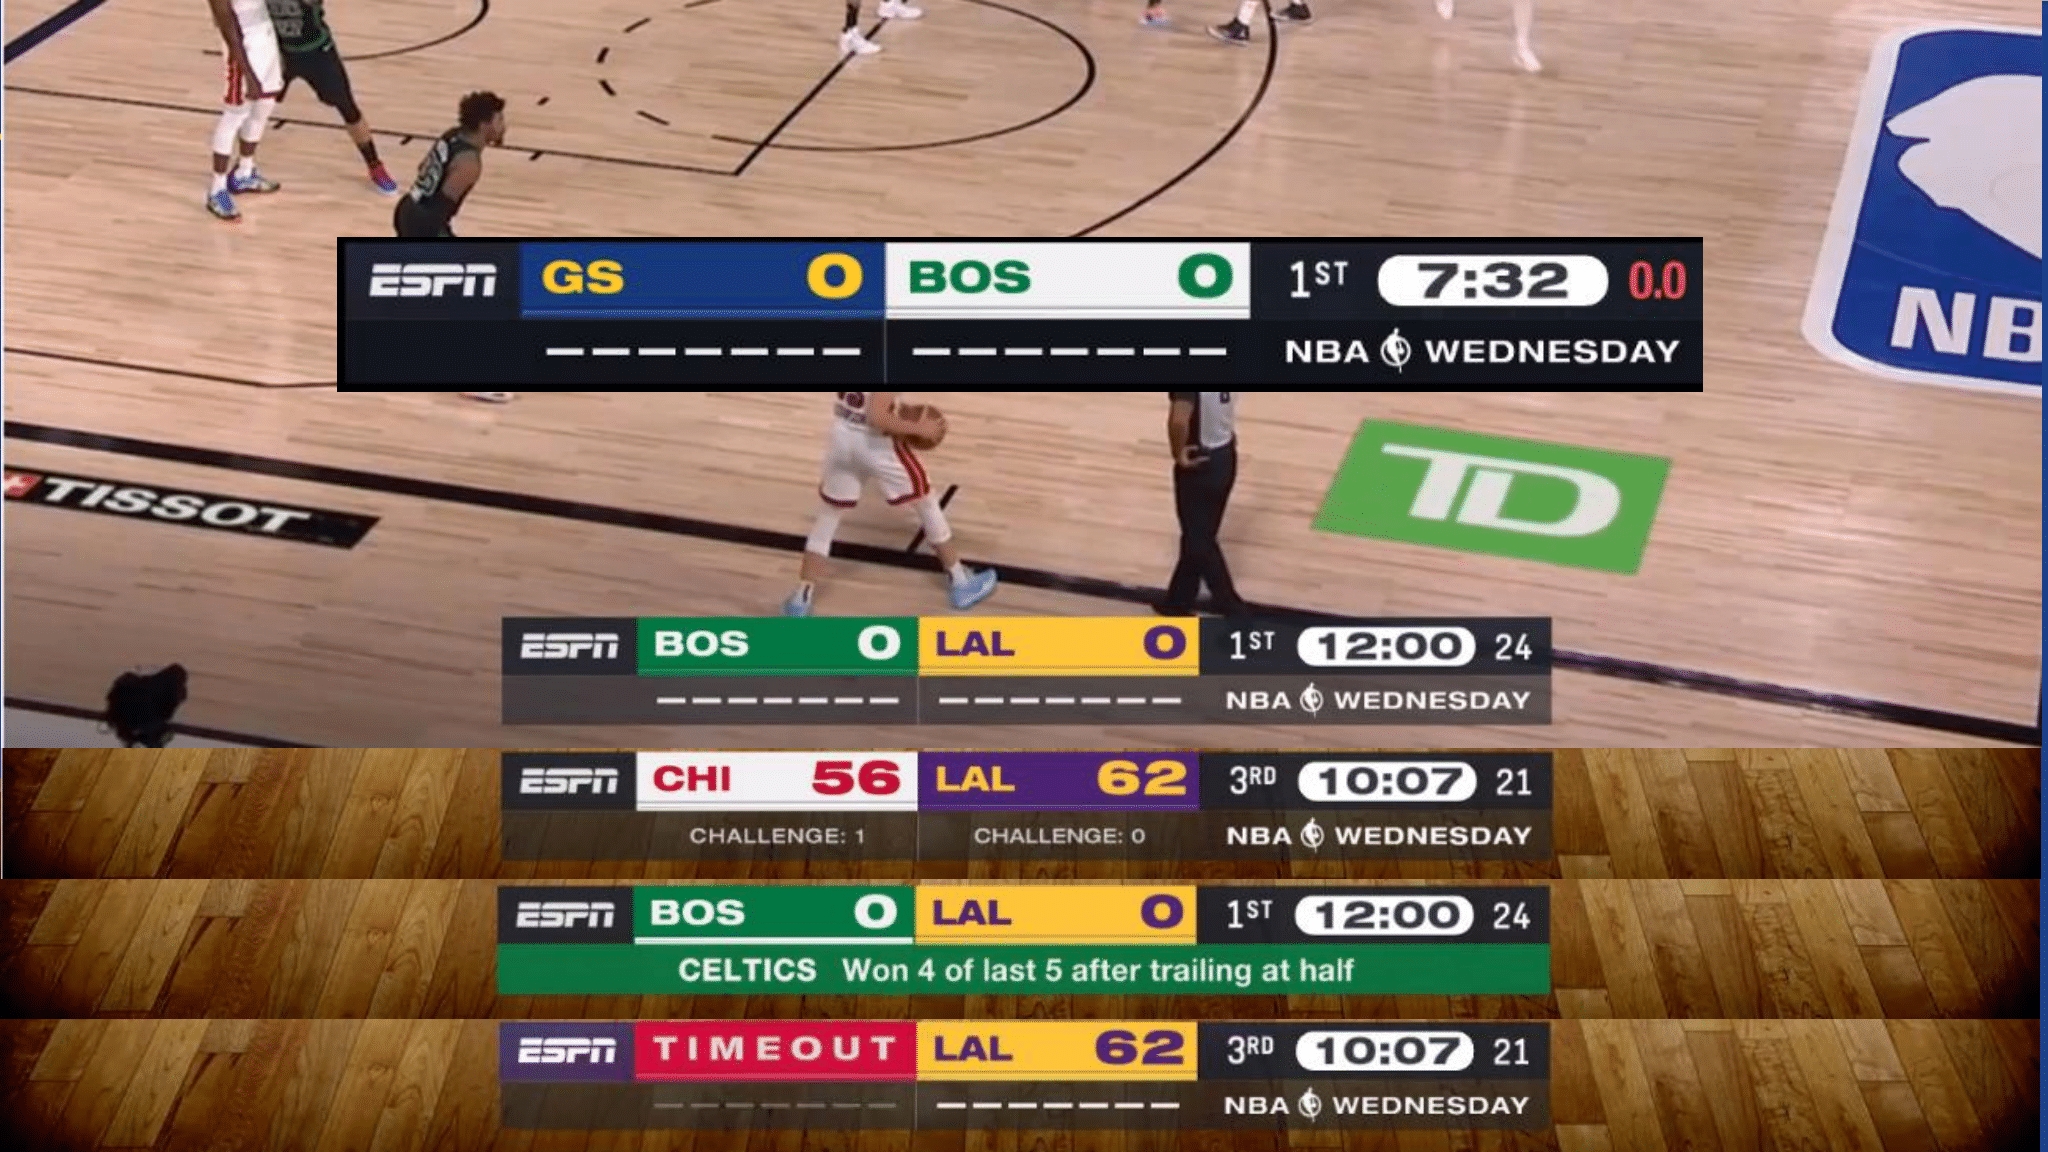 ESPN's New NBA Theme Song And Graphics Package For 2022-23